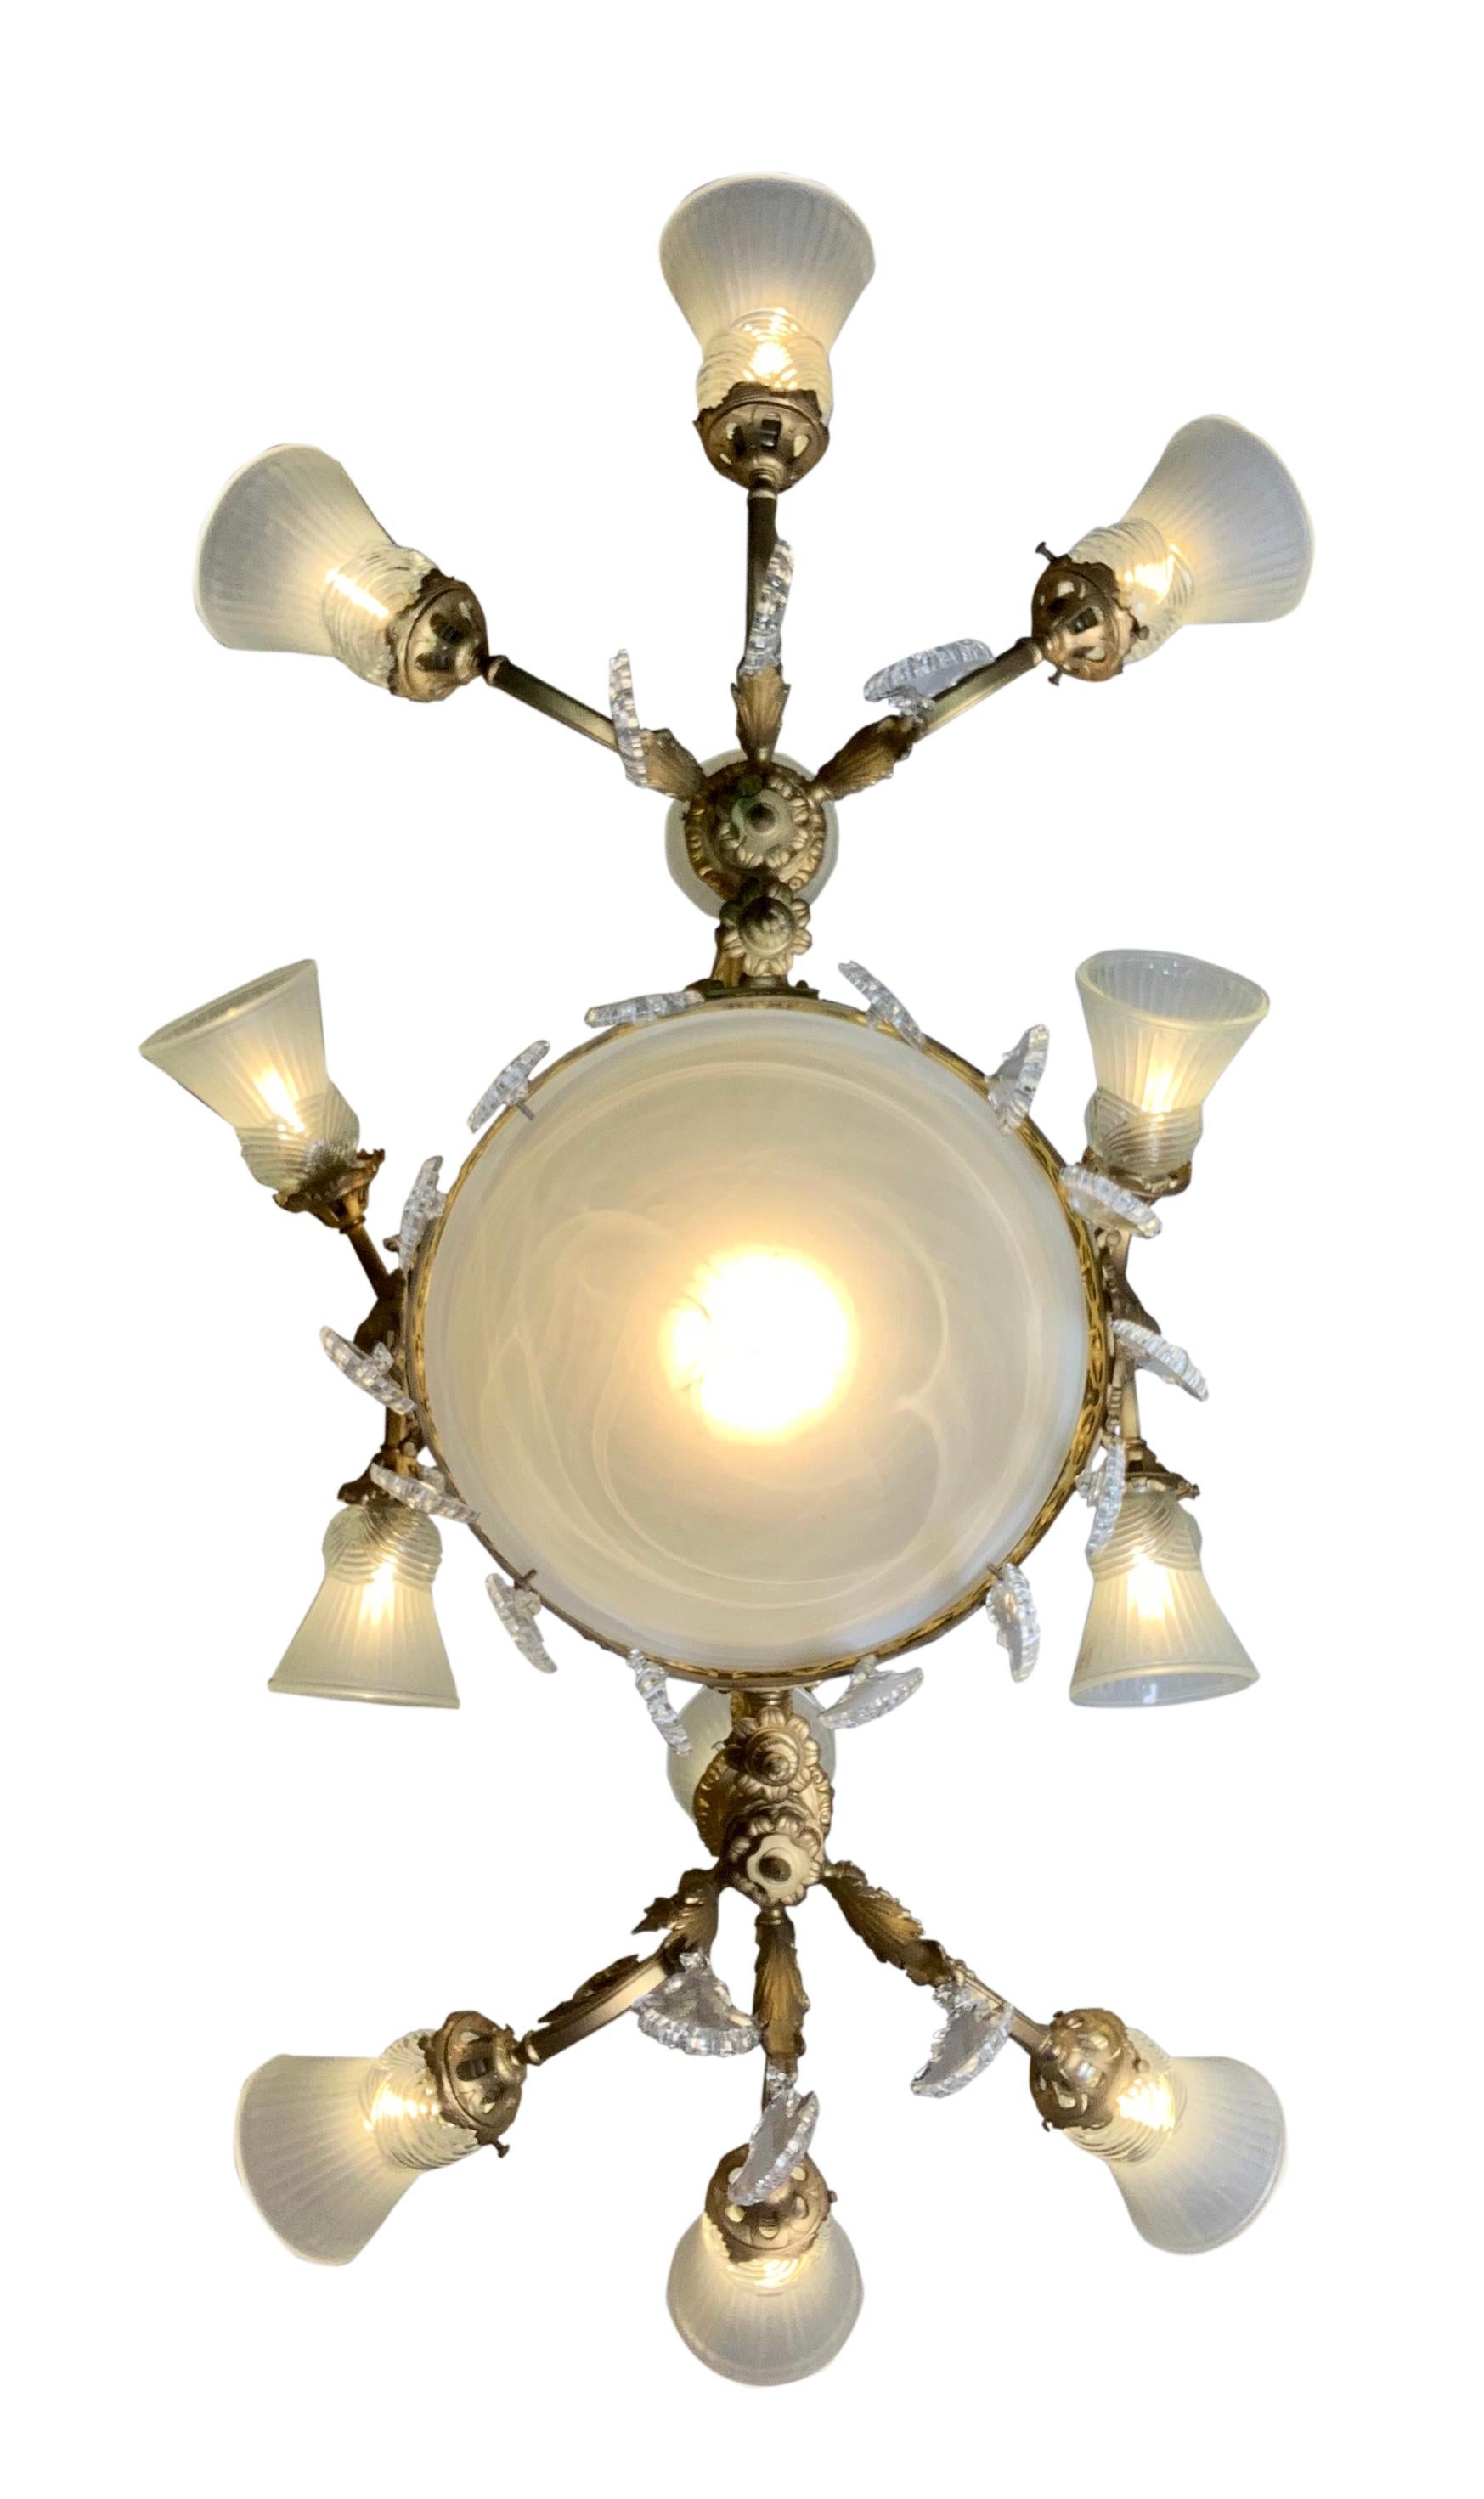 19th Century French Gilt Bronze and Crystal Twelve-Light Chandelier with dragons For Sale 3